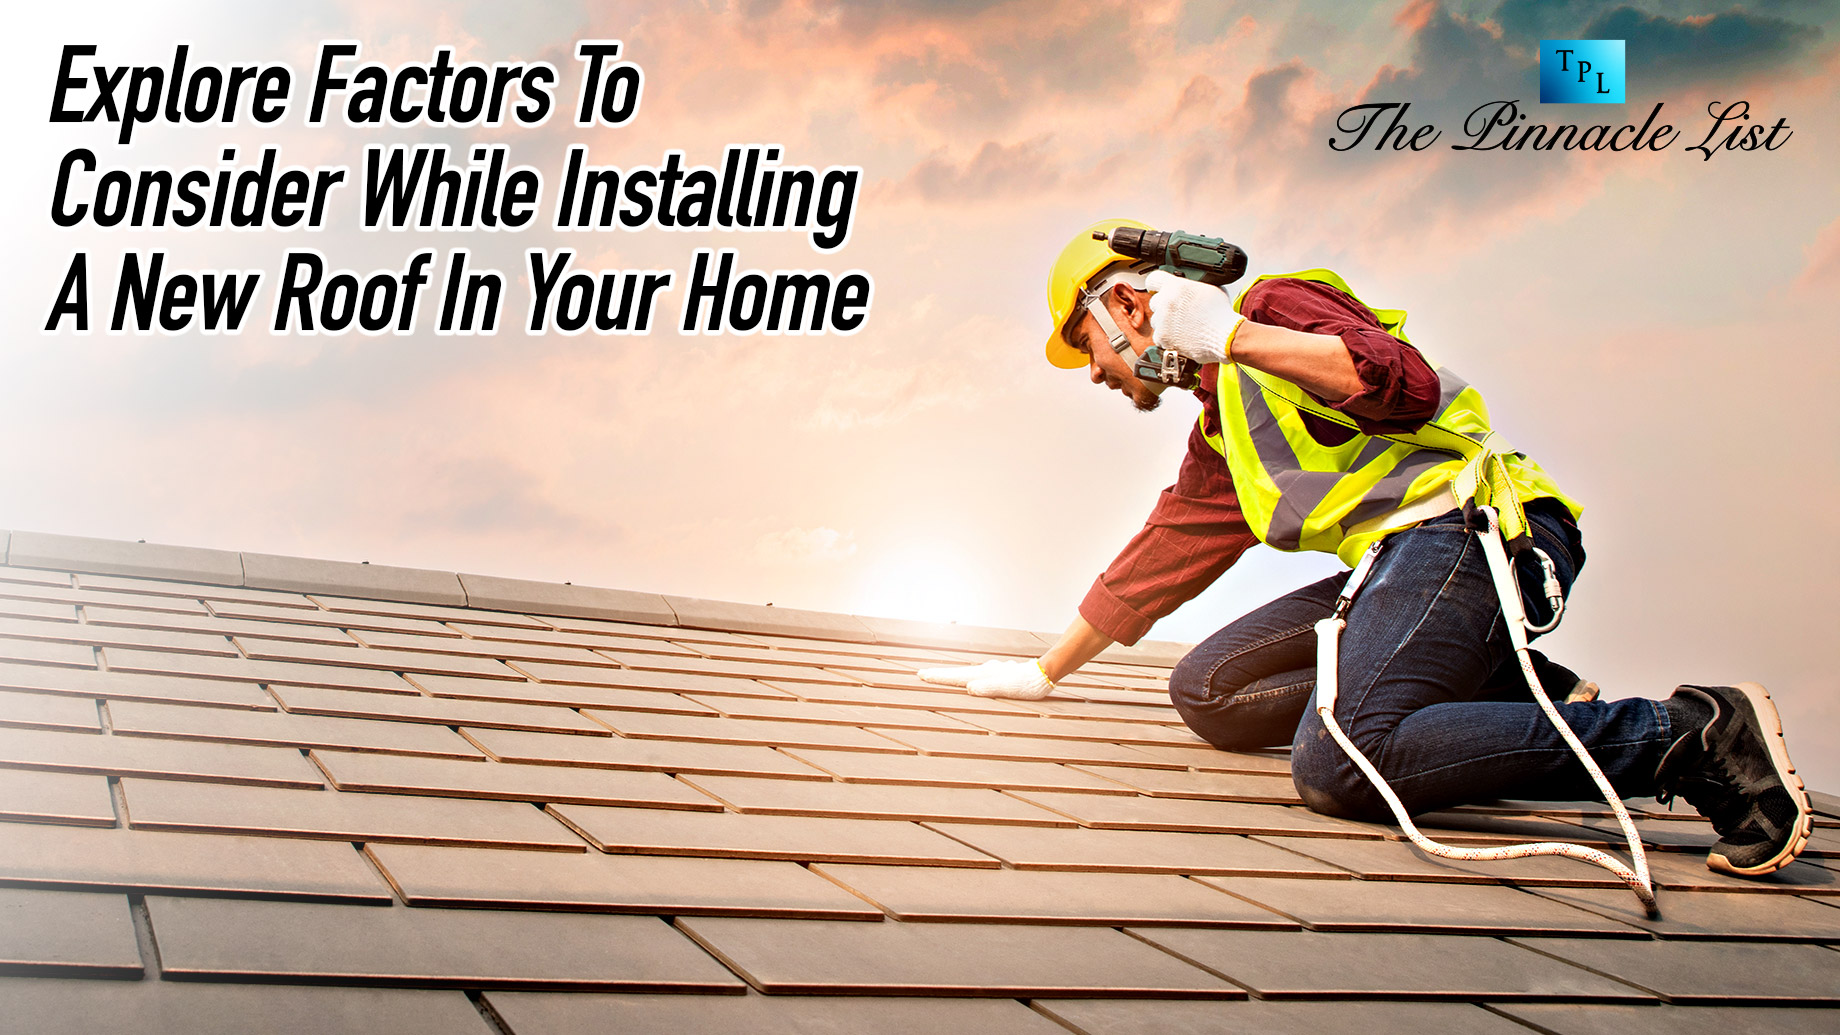 Explore Factors To Consider While Installing A New Roof In Your Home